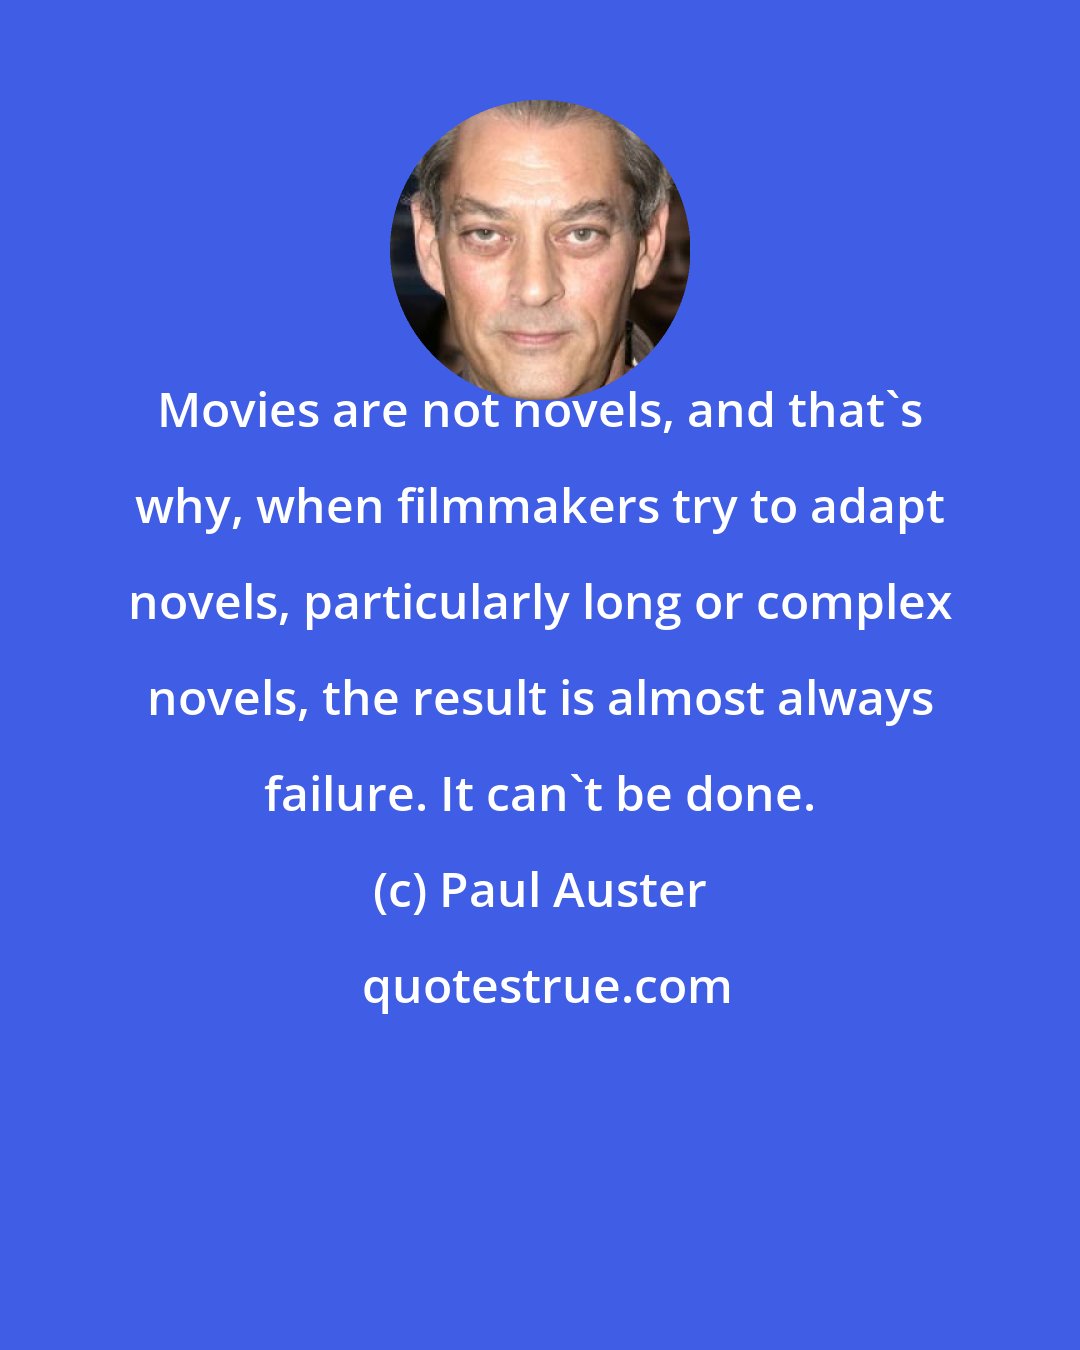 Paul Auster: Movies are not novels, and that's why, when filmmakers try to adapt novels, particularly long or complex novels, the result is almost always failure. It can't be done.